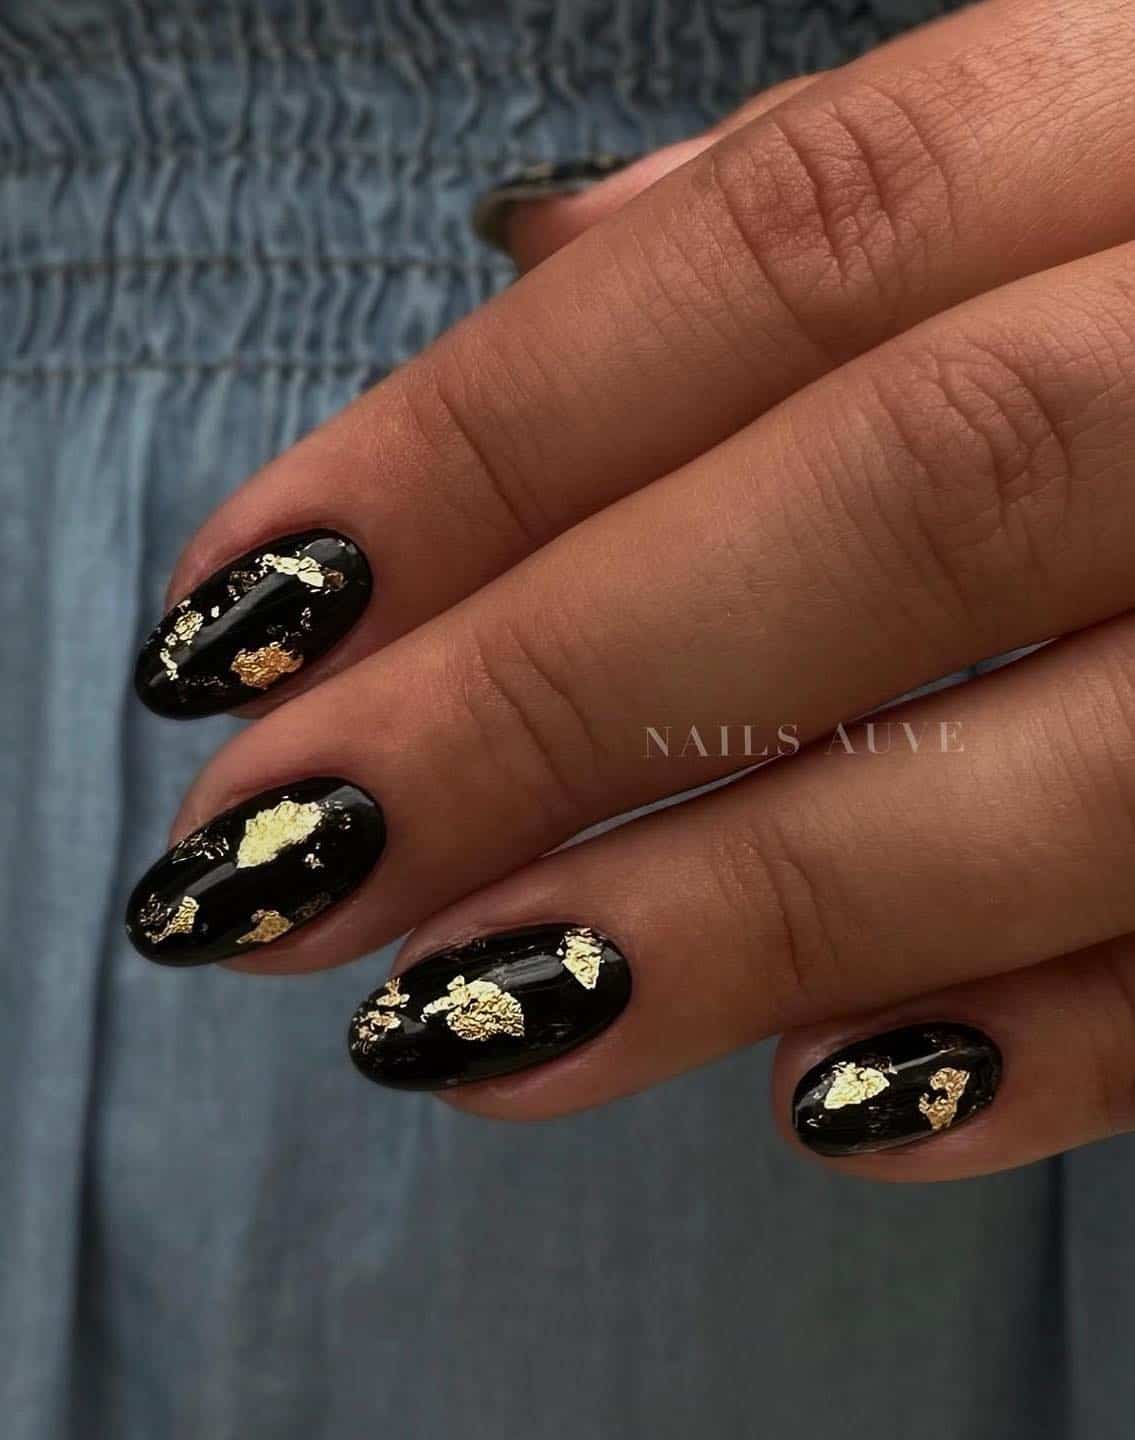 Short glossy black nails with gold flakes